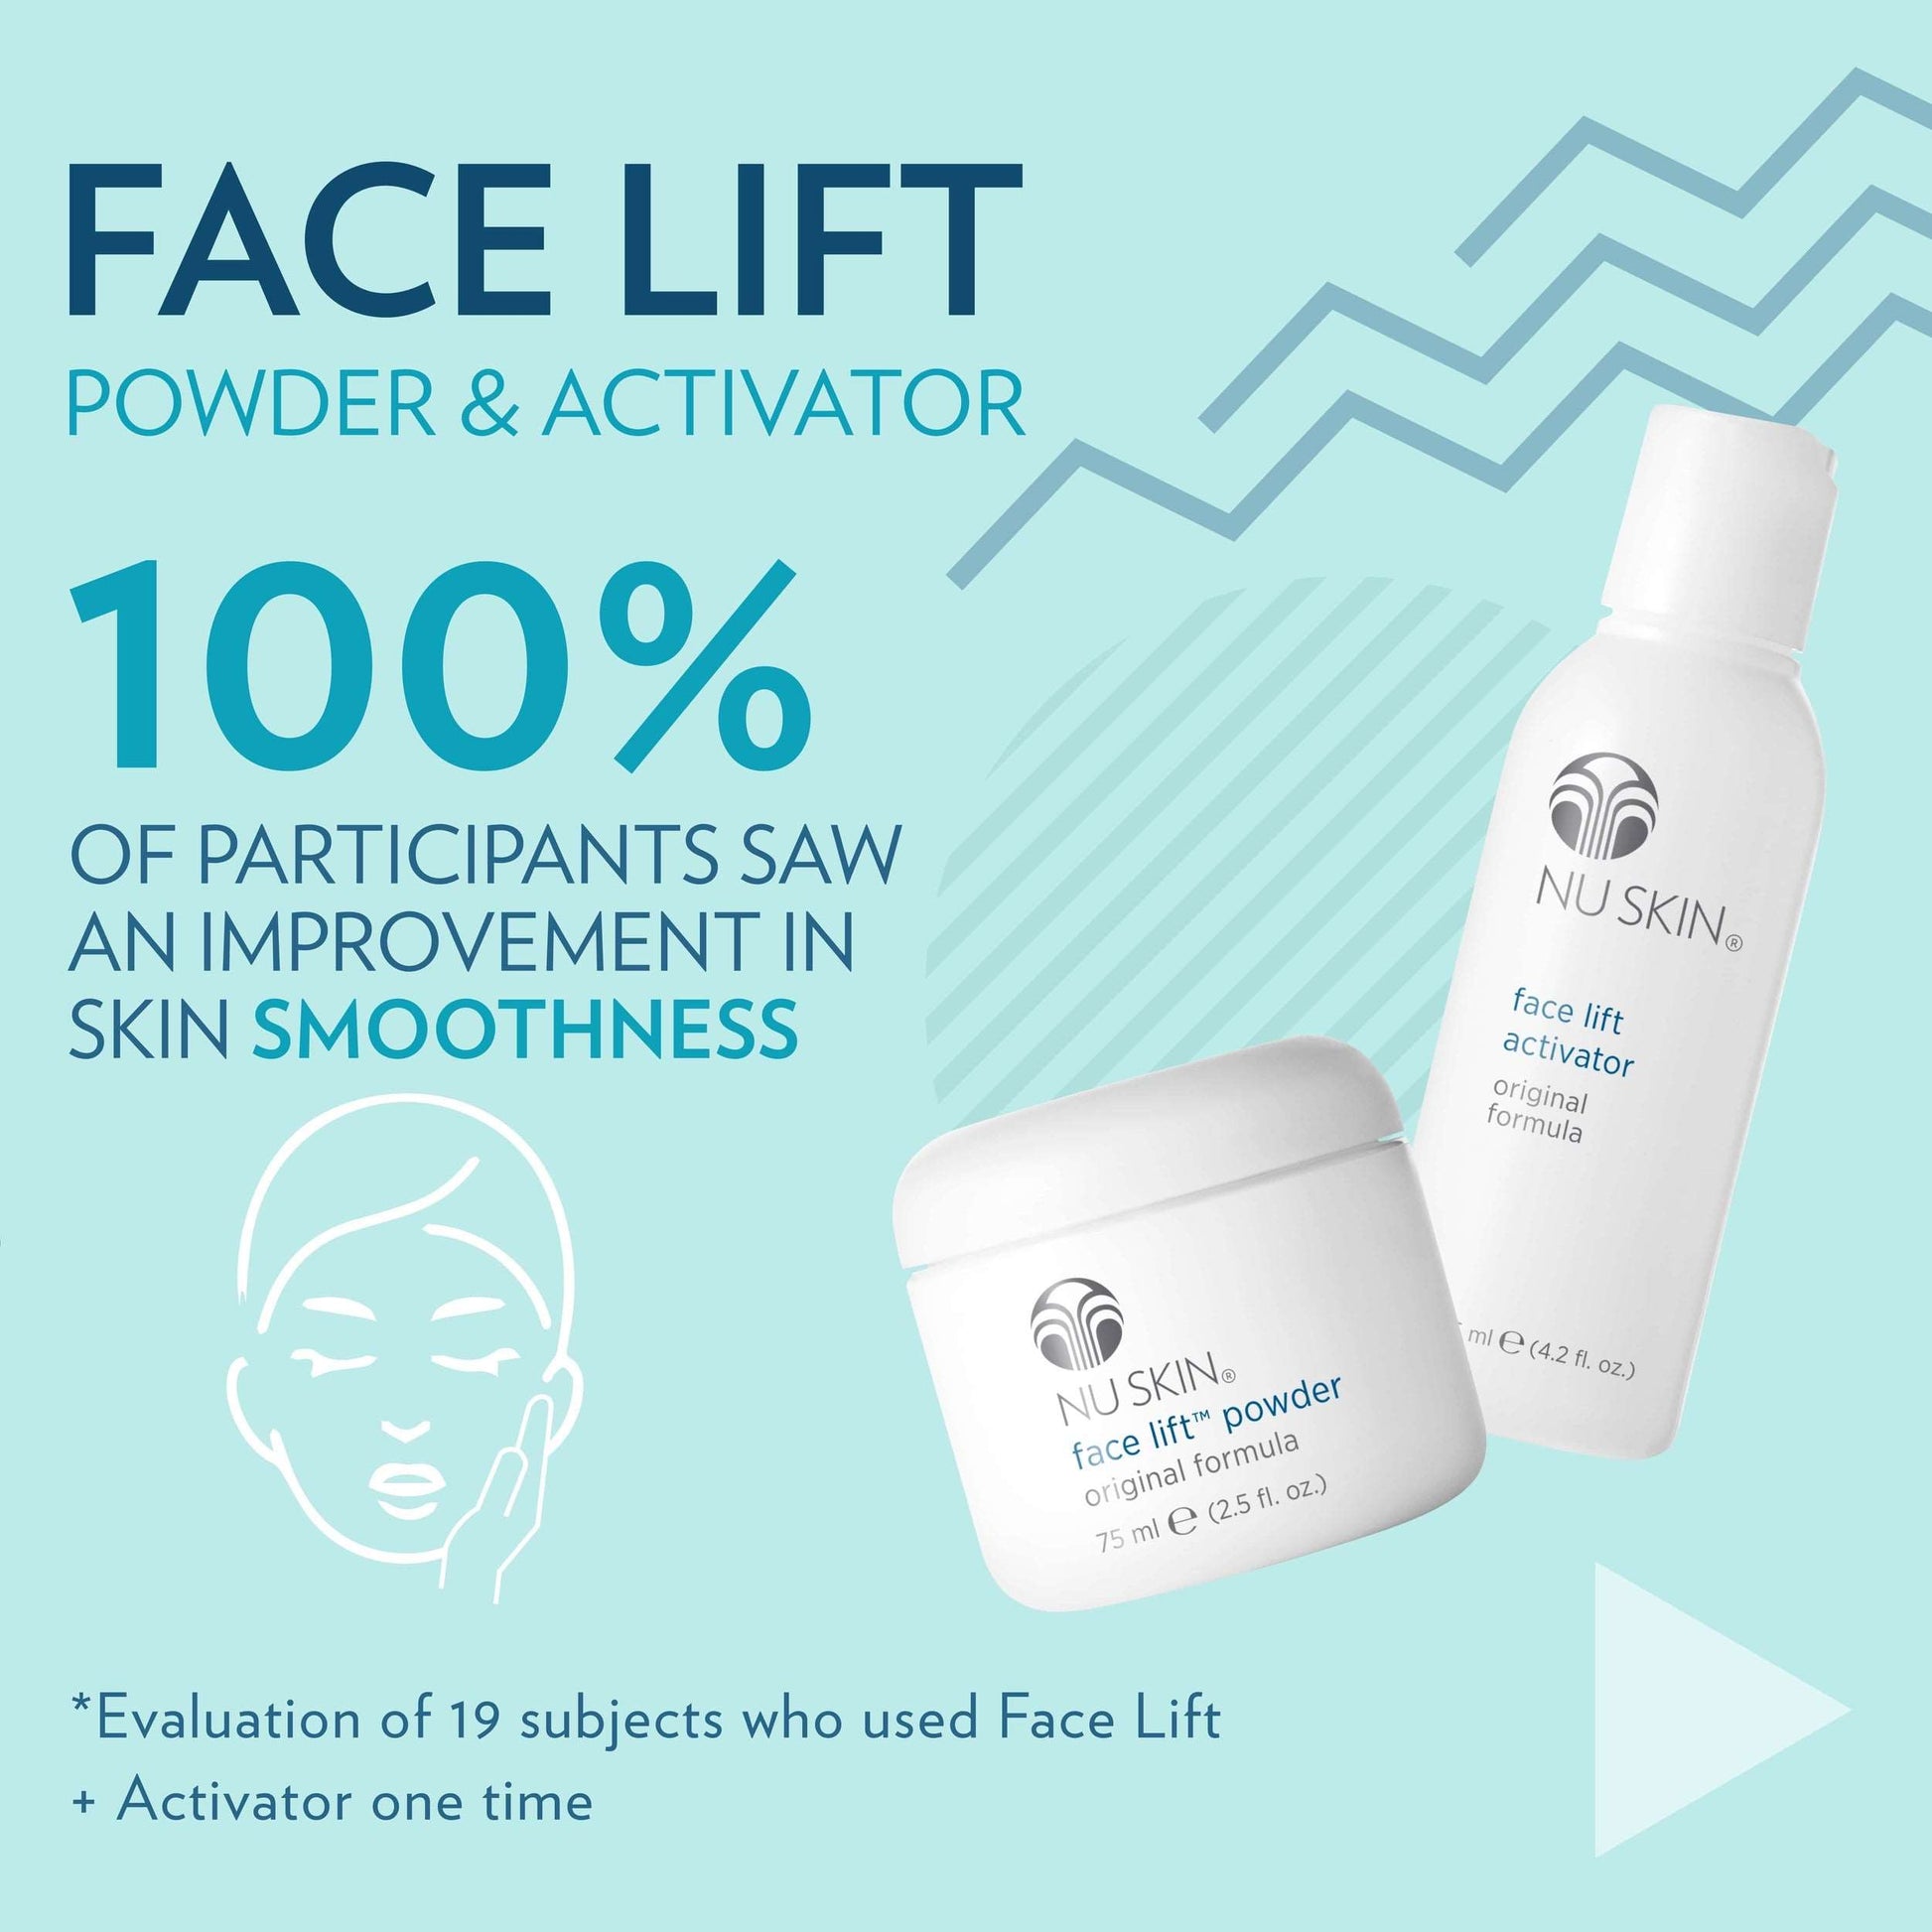 Activator (Original Formula)Buy Face Lift with Activator (Original Formula)
Face Lift works immediately to temporarily lift and tighten the face and neck for a firmer, more youthful appearance.Face Lift with Activator (Original Formula)